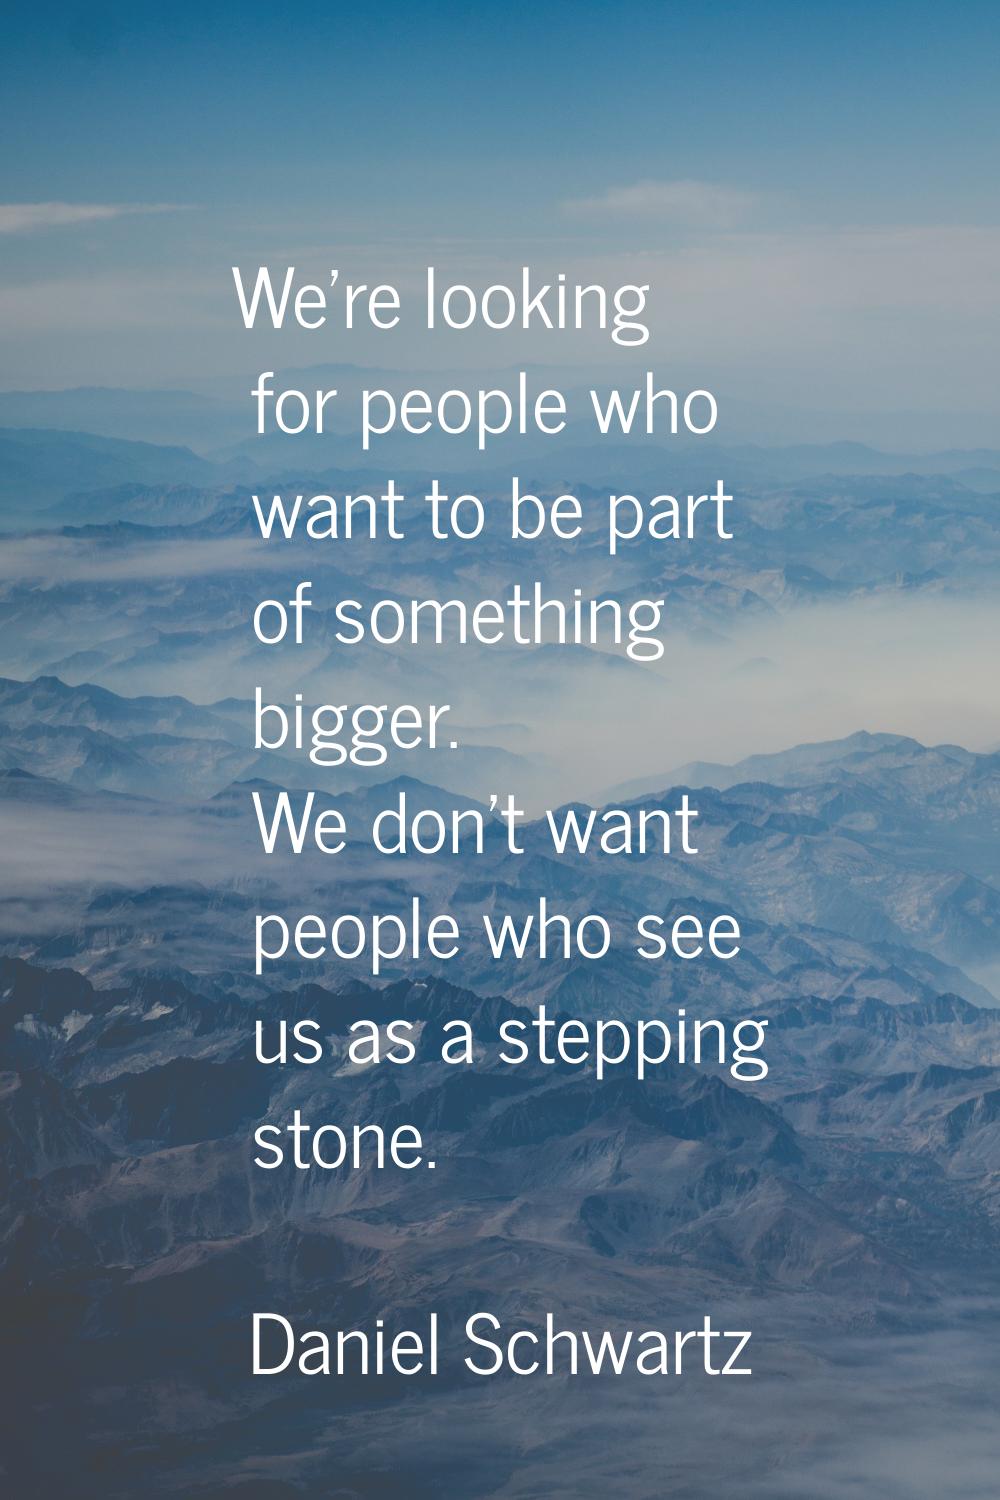 We're looking for people who want to be part of something bigger. We don't want people who see us a